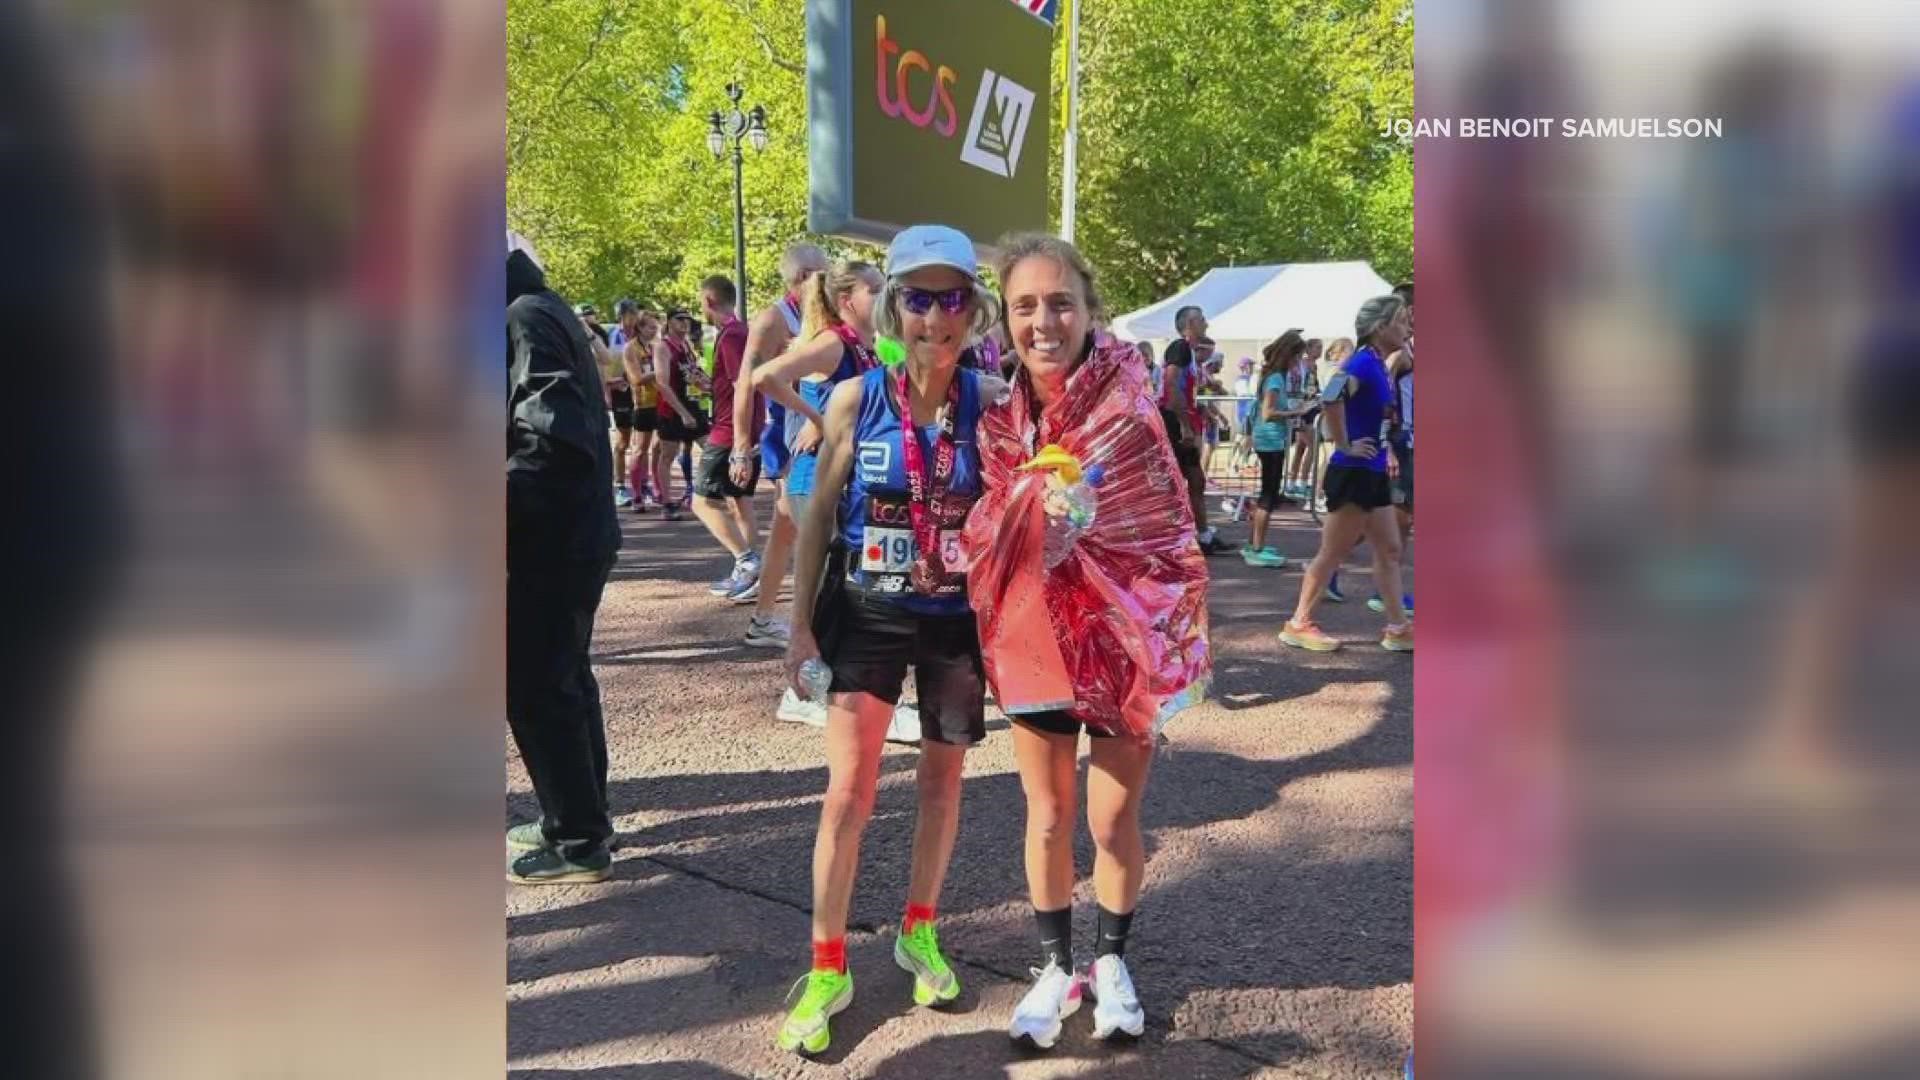 Samuelson is hoping to run all six major marathons. She has now done five of them. The Tokyo Marathon is last on the list, and she plans to do that one in March.